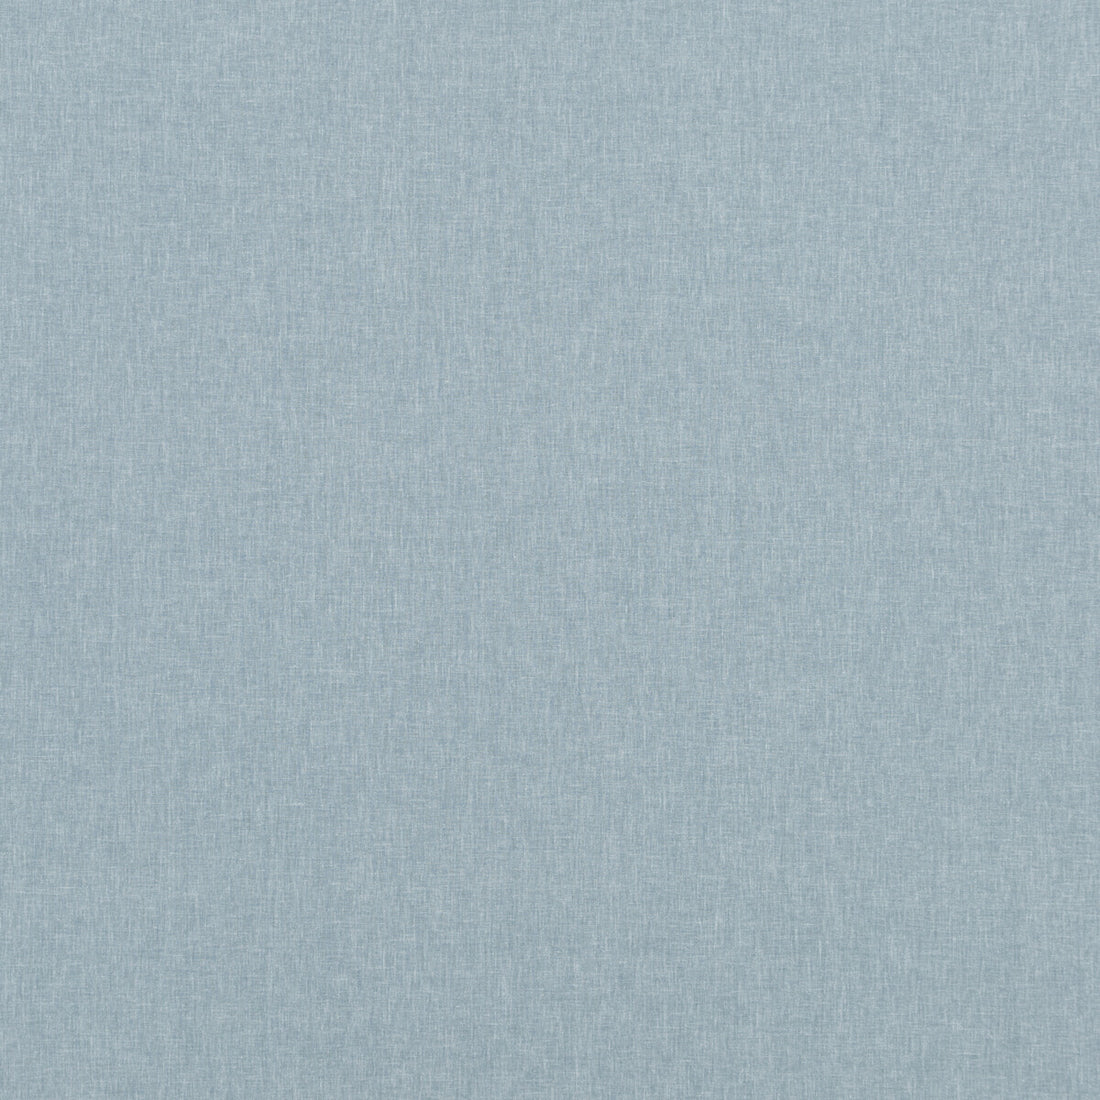 Carnival Plain fabric in ocean color - pattern PF50420.612.0 - by Baker Lifestyle in the Carnival collection